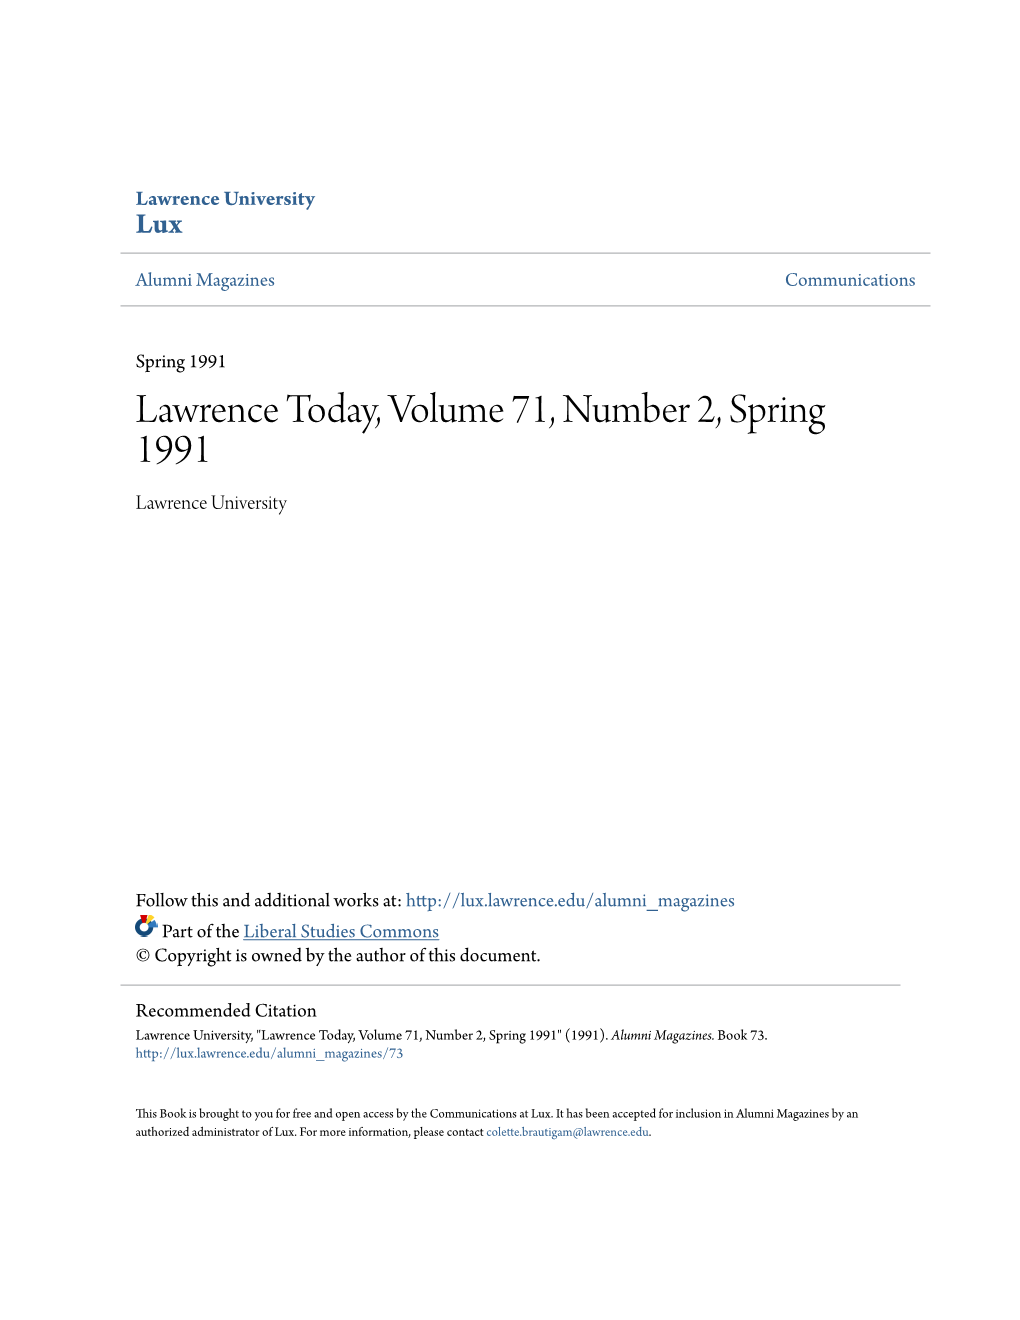 Lawrence Today, Volume 71, Number 2, Spring 1991 Lawrence University